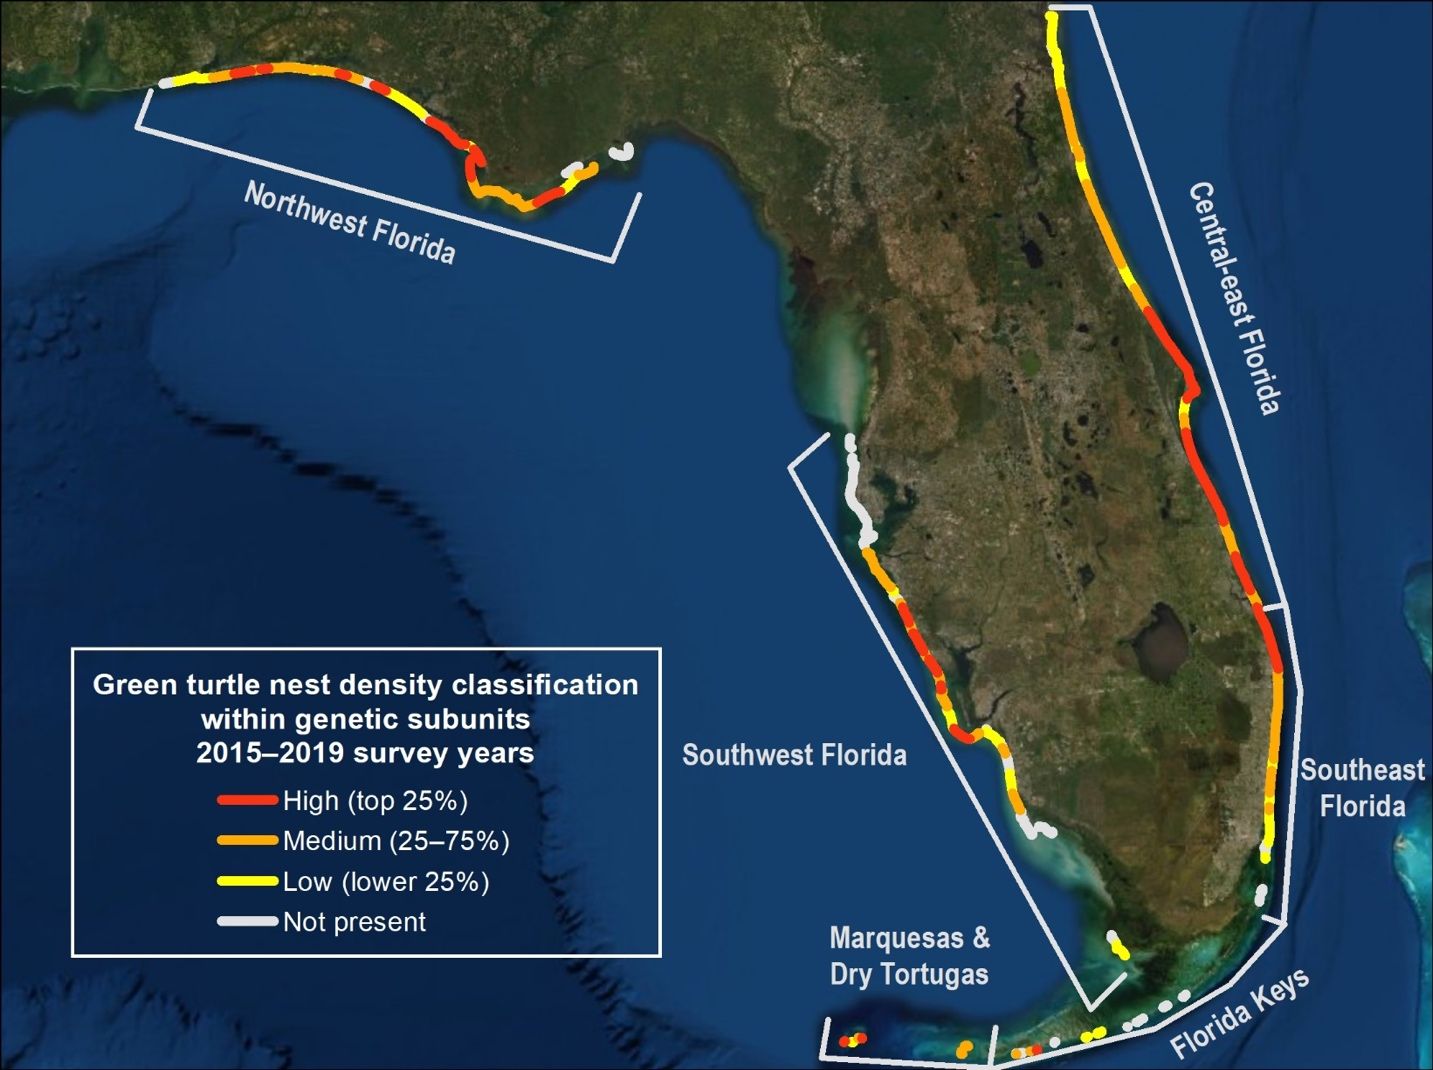 Green turtle nest density (measured in number of nests per kilometer of beach) by genetic subunit in Florida during a recent five-year period (2015–2019). High-density beaches are those having the top 25 percent of density values (red); low-density beaches have the lowest 25 percent (yellow); and beaches with densities between these two categories are defined as medium-density beaches (orange). White indicates beaches where green turtles were not observed to have nested during the five-year period. The white brackets indicate the genetic subunits. 